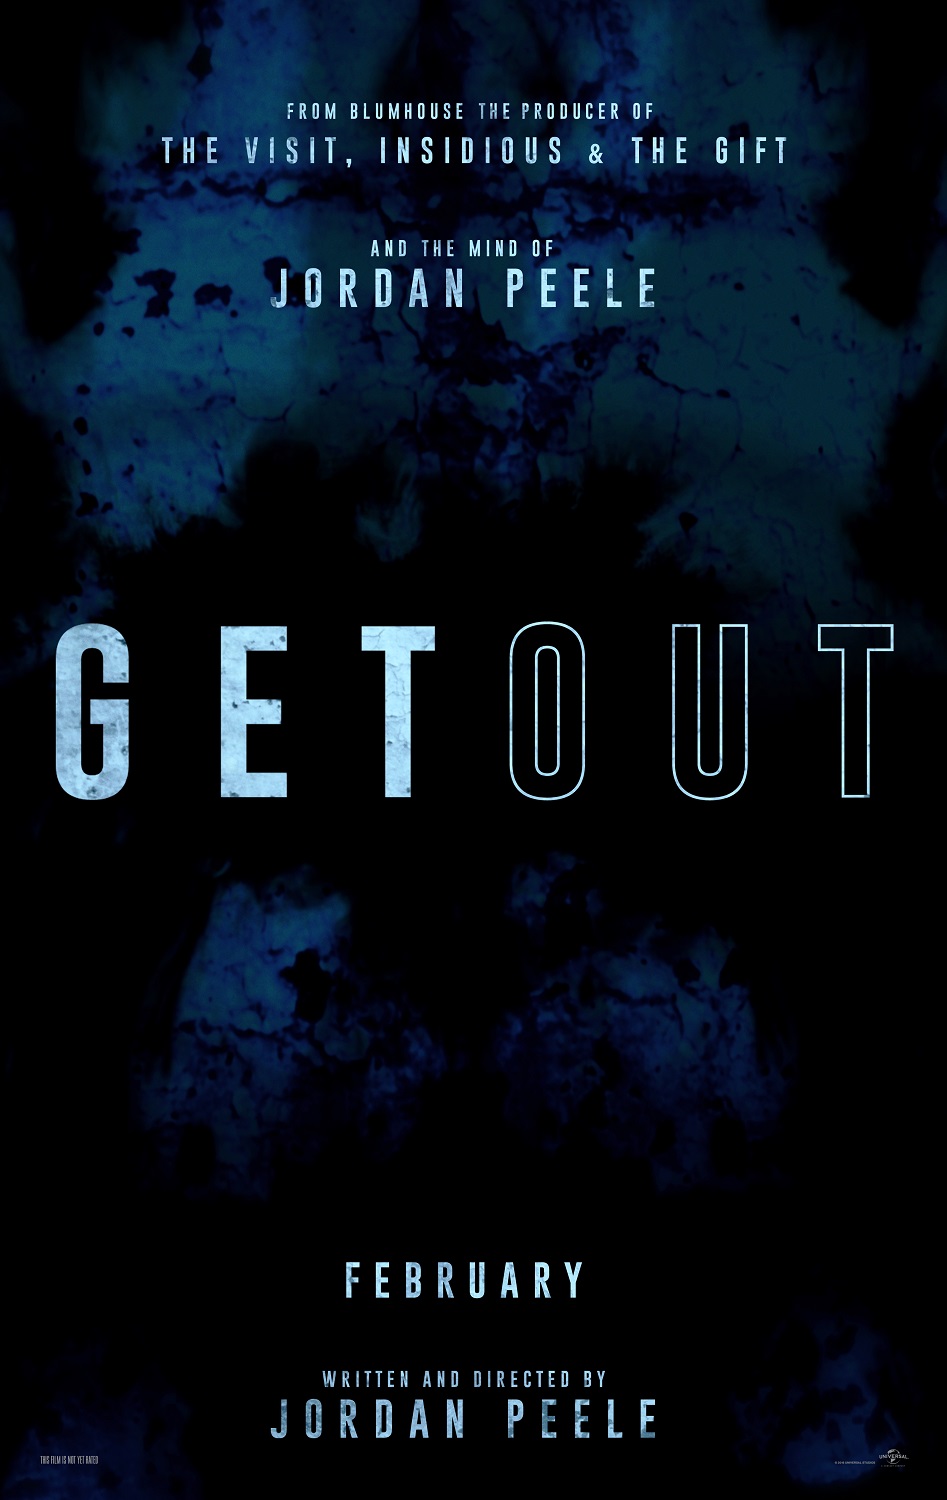 New Trailer For Jordan Peele’s ‘Get Out’